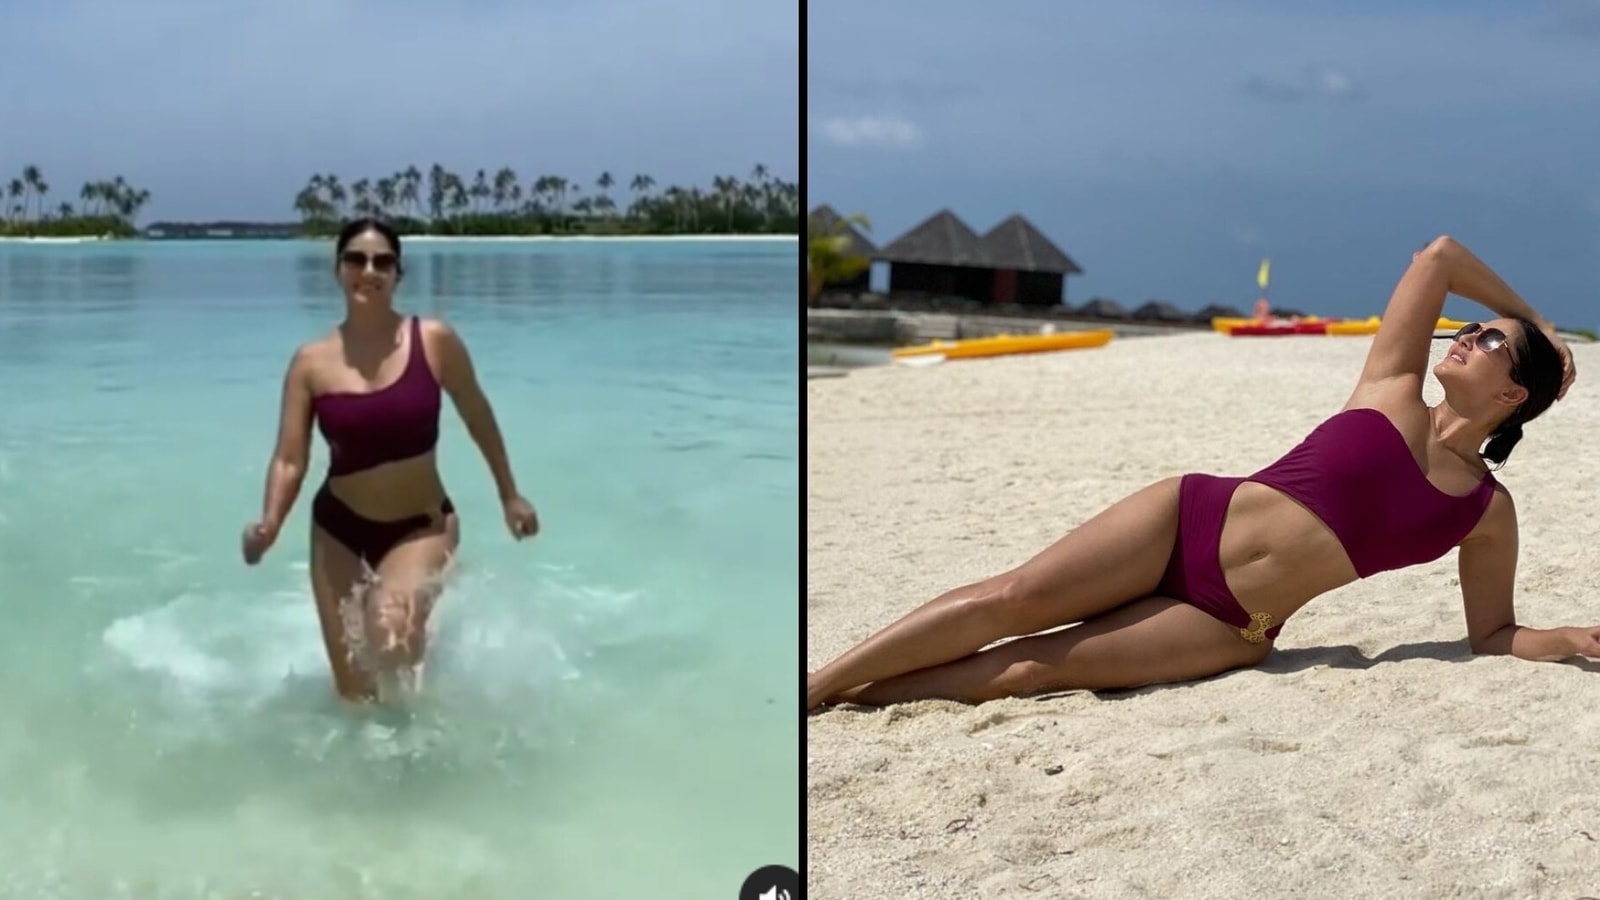 Sani Lovan Sex - Sunny Leone does slo-mo run as she emerges from water, blows kiss. Watch  video from Maldives holiday | Bollywood - Hindustan Times